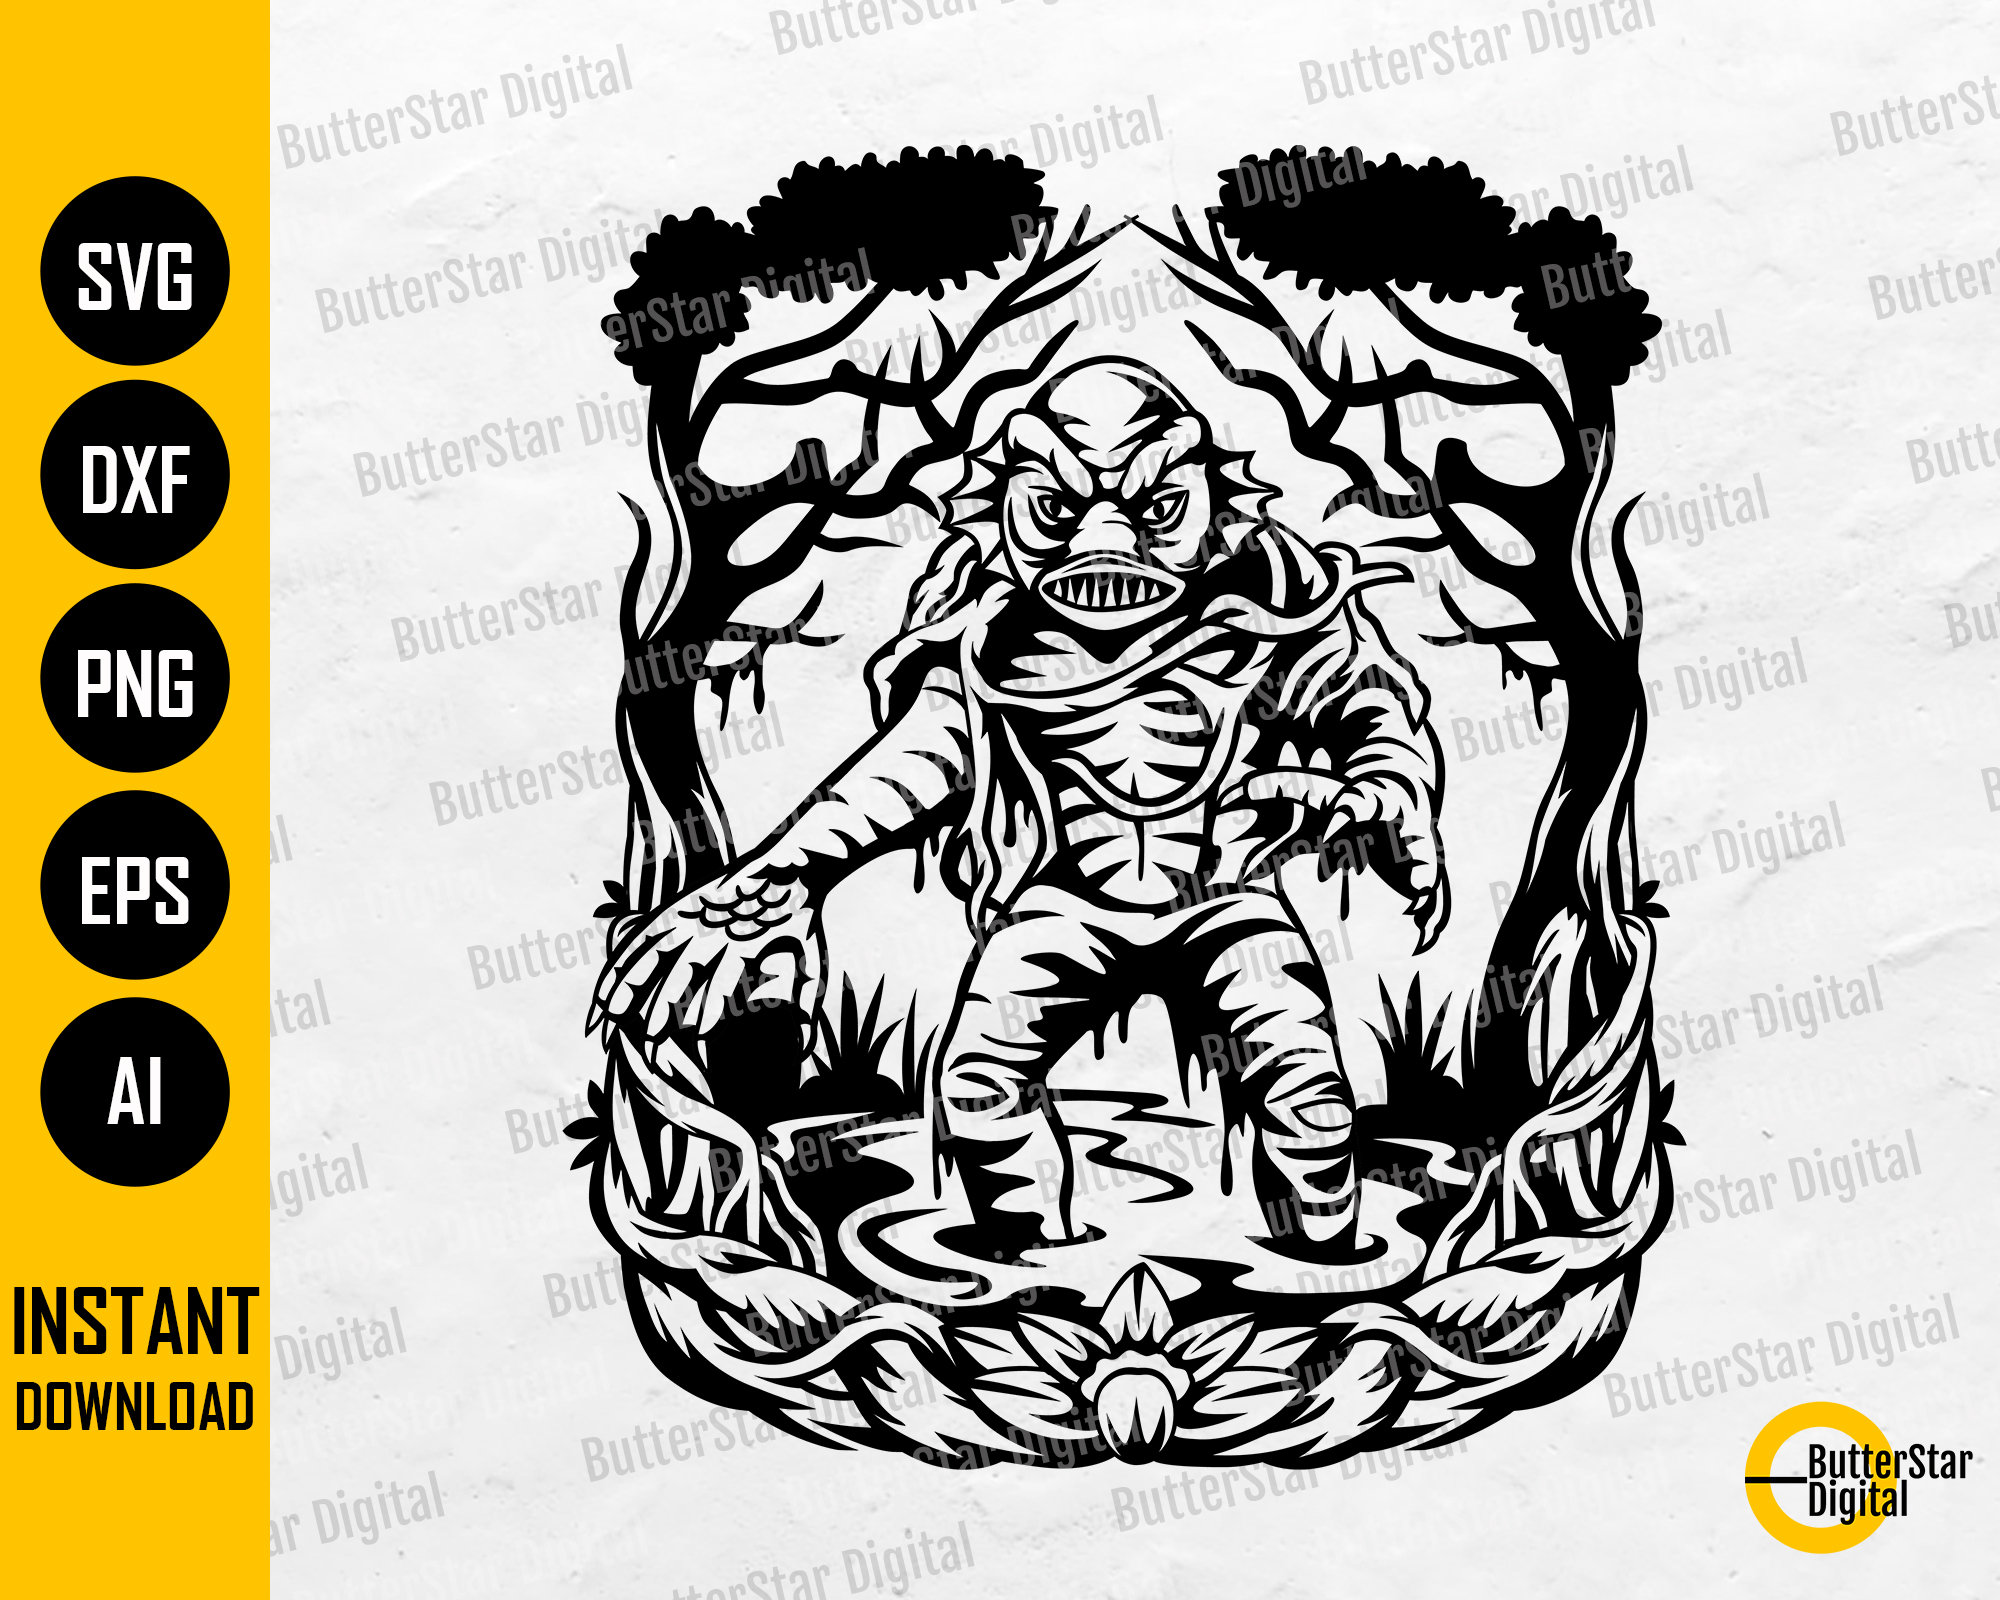 Ancient Medieval Fantasy Evil Characters Creatures Monsters Folklore  Gargoyle Legend Troll Monsters Creature Instant Download PNG SVG Vector 